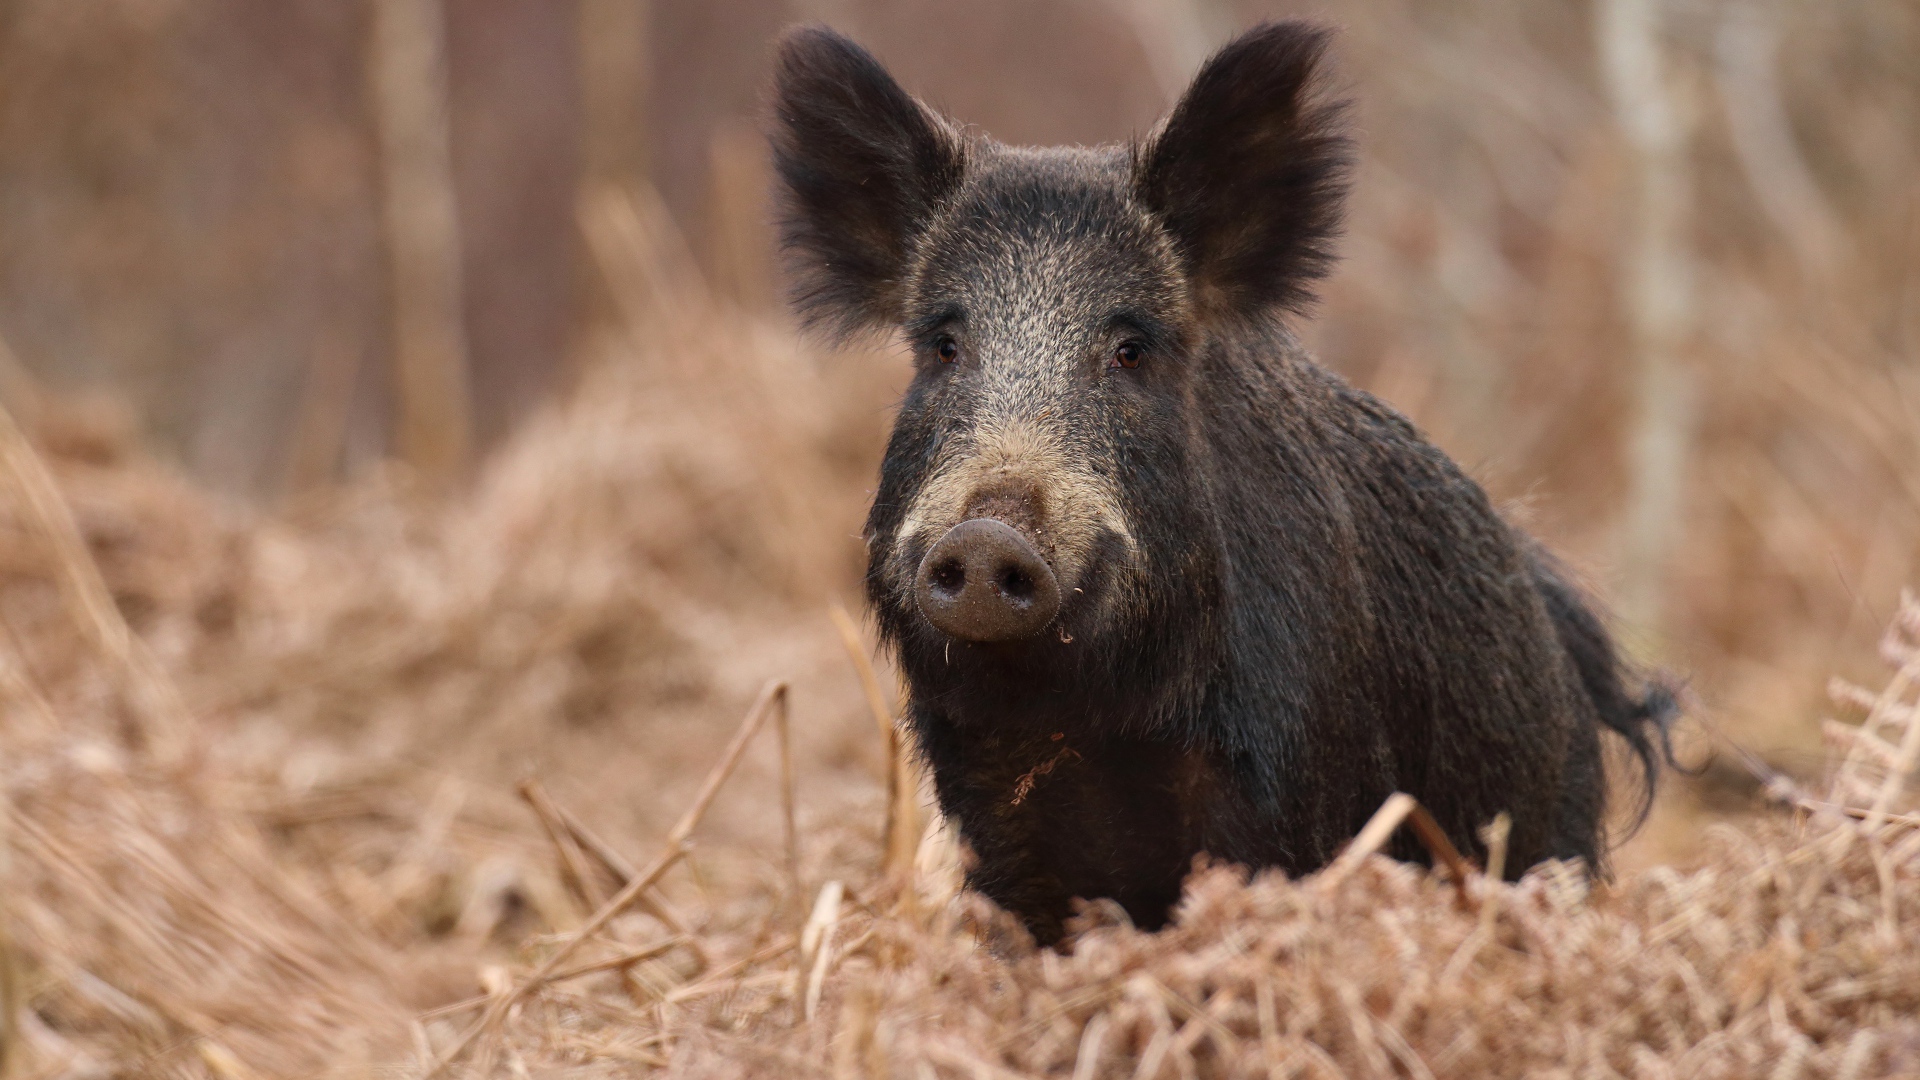 Large black hog in the forest on dry grass